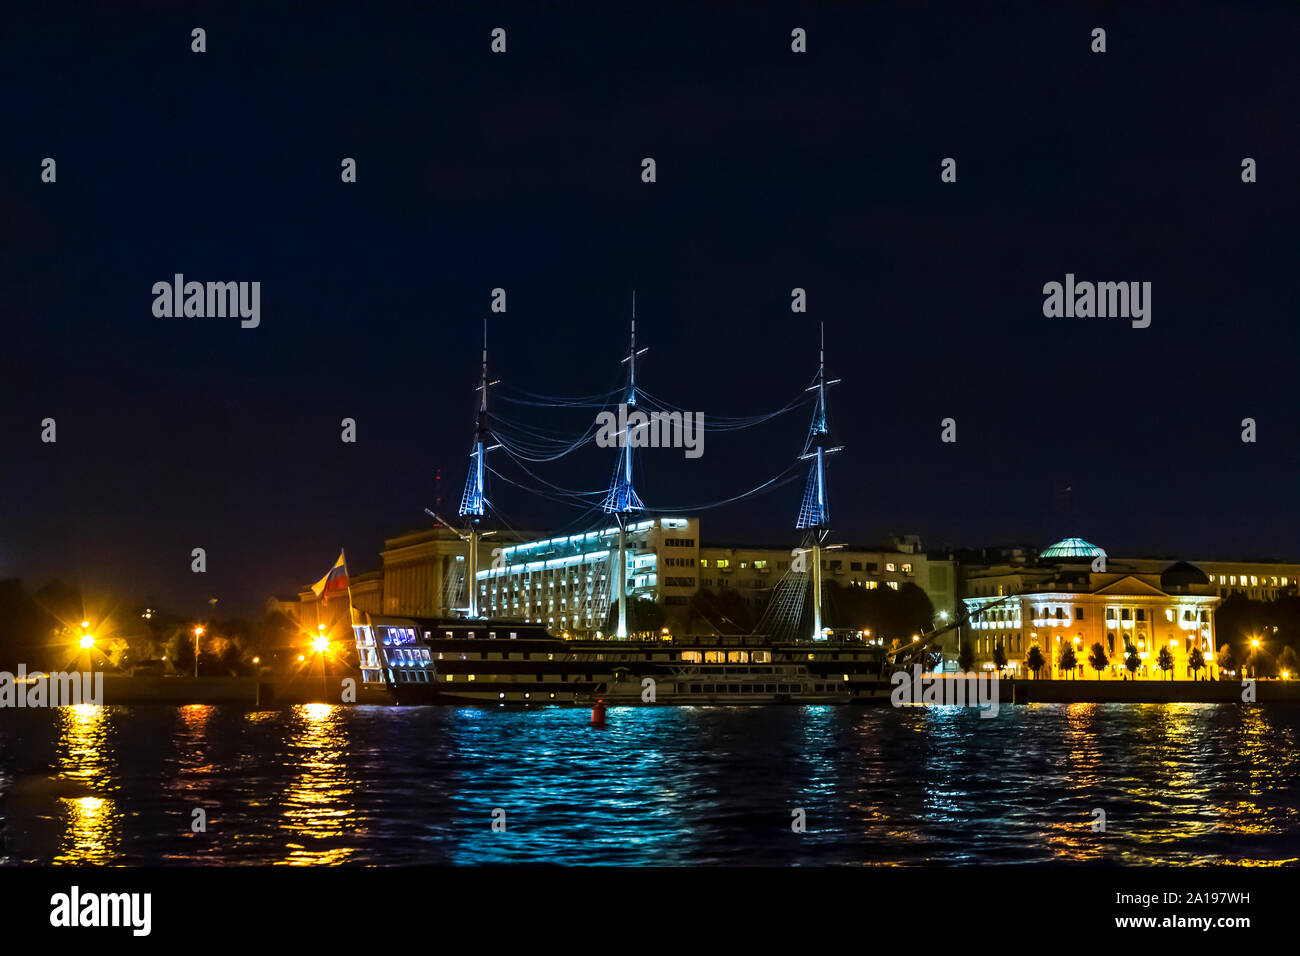 Fregat Blagodat, a floating restaurant on the River Neva illuminated during the evening, St Petersburg, Russia. Stock Photo